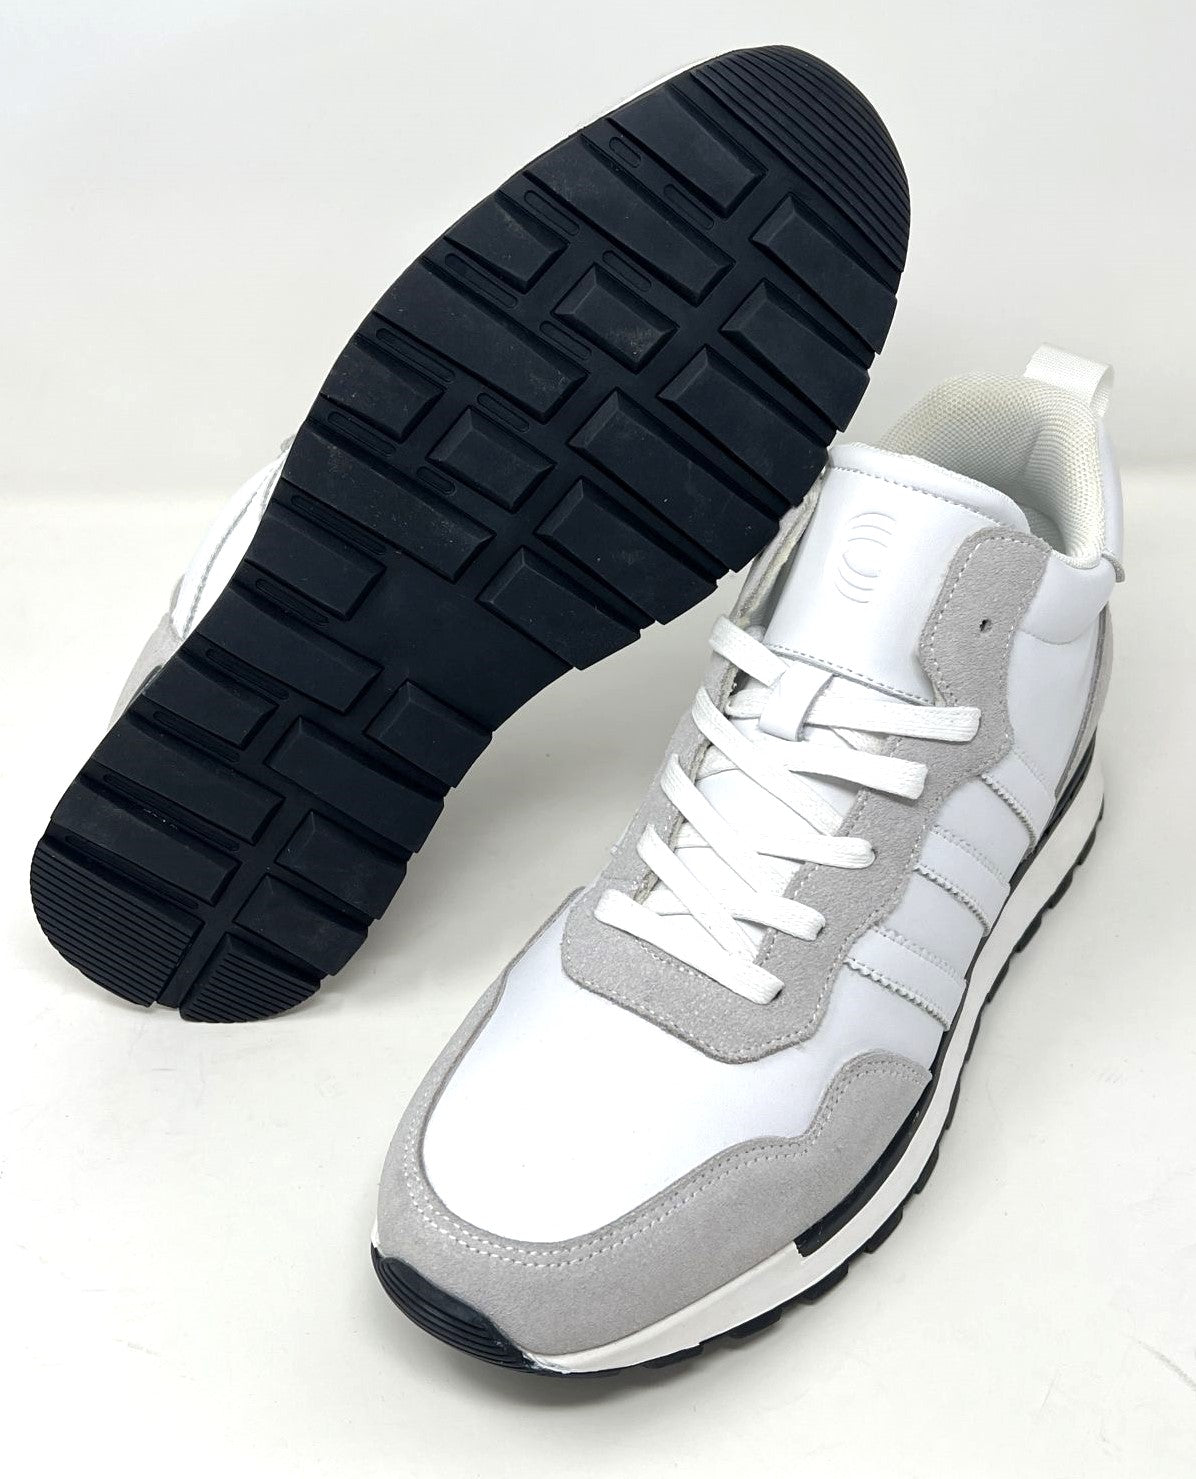 FSG0078 - 2.6 Inches Taller (White/Grey) - Size 9 Only